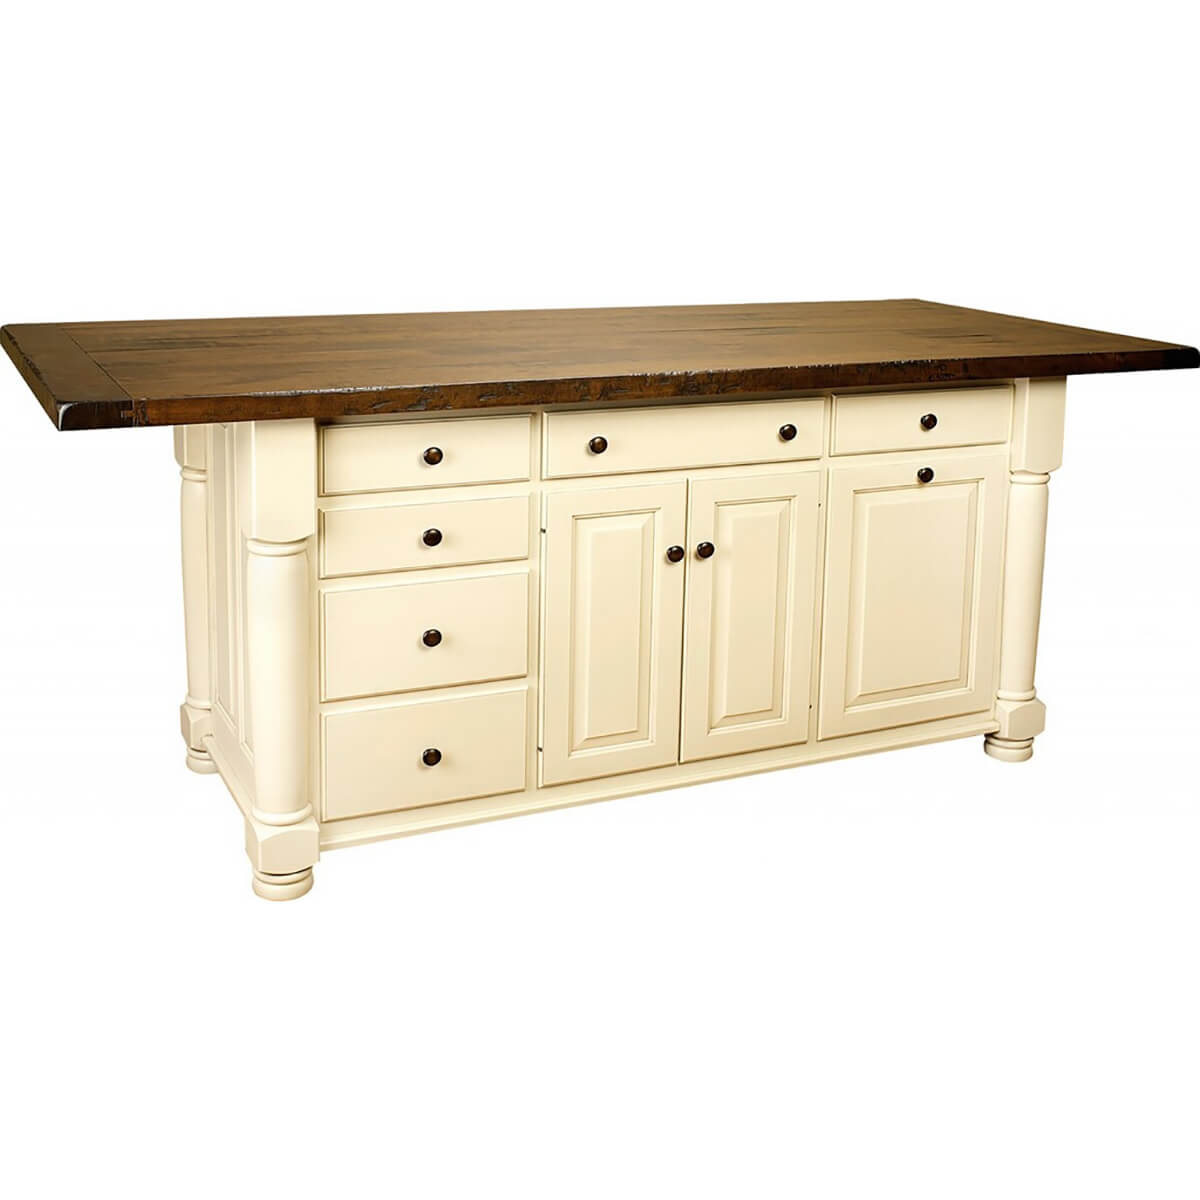 Read more about the article Turned Leg Kitchen Island Cabinet